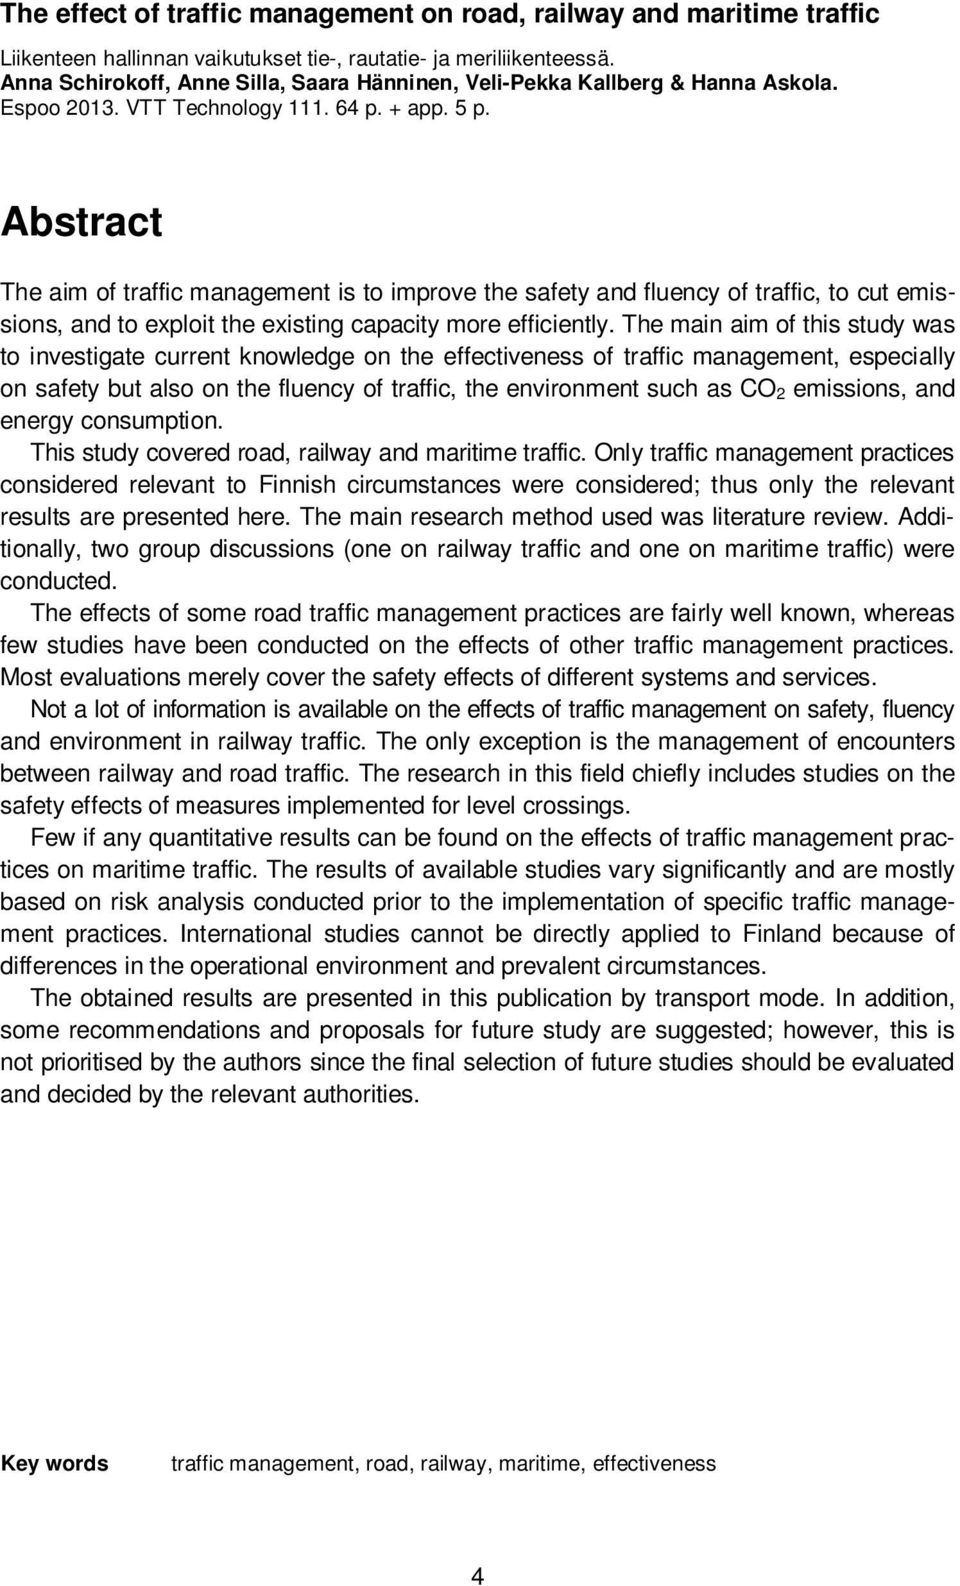 Abstract The aim of traffic management is to improve the safety and fluency of traffic, to cut emissions, and to exploit the existing capacity more efficiently.